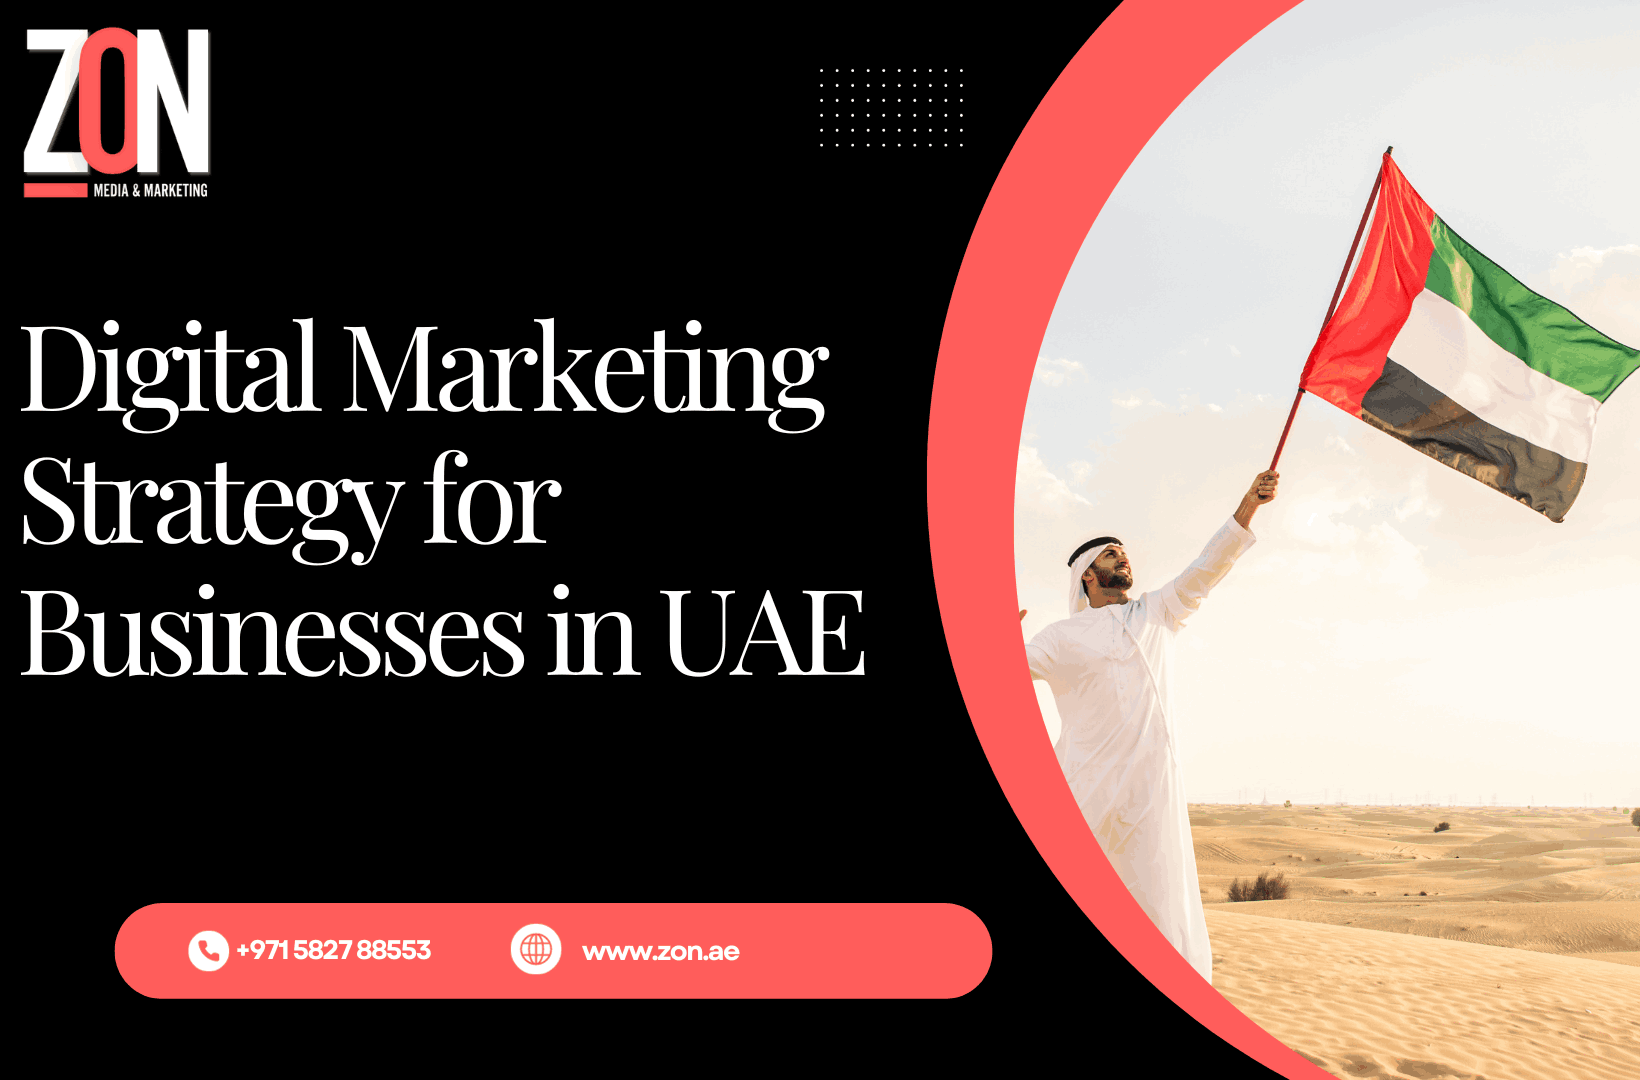 Digital Marketing Strategy for Businesses in UAE